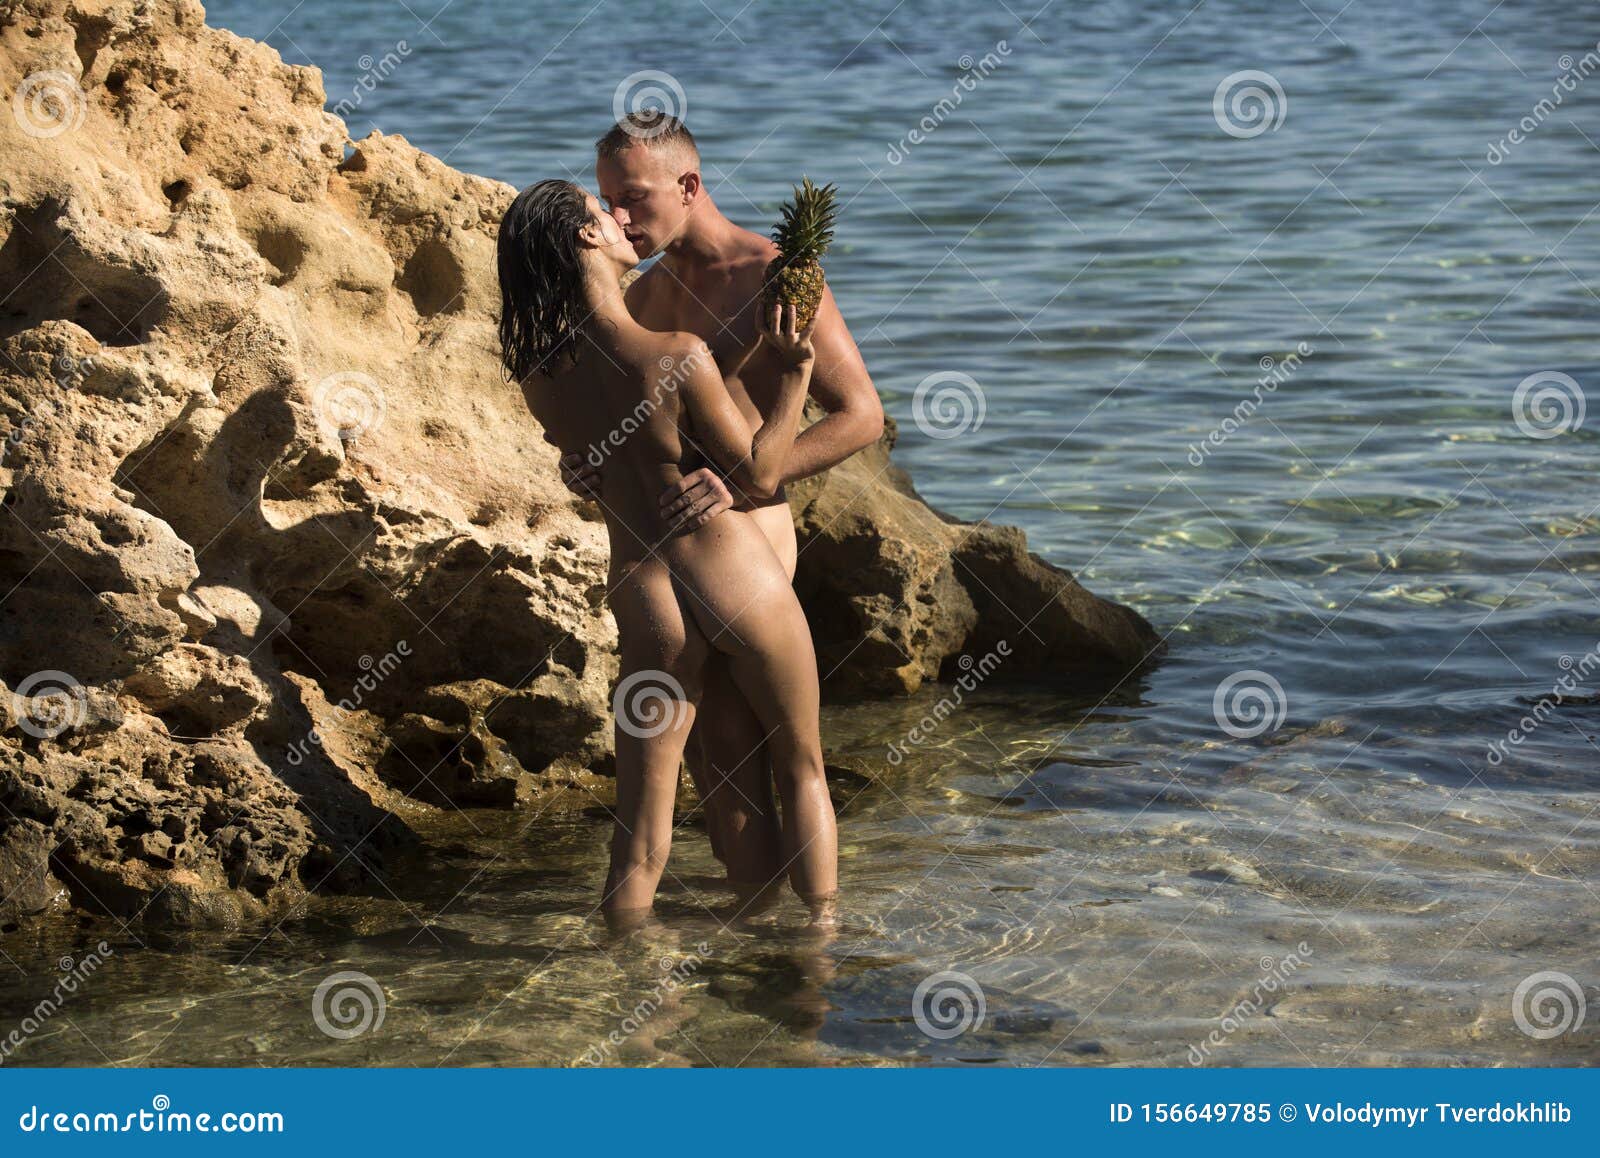 young lovers nudist beach xxx gallery pic